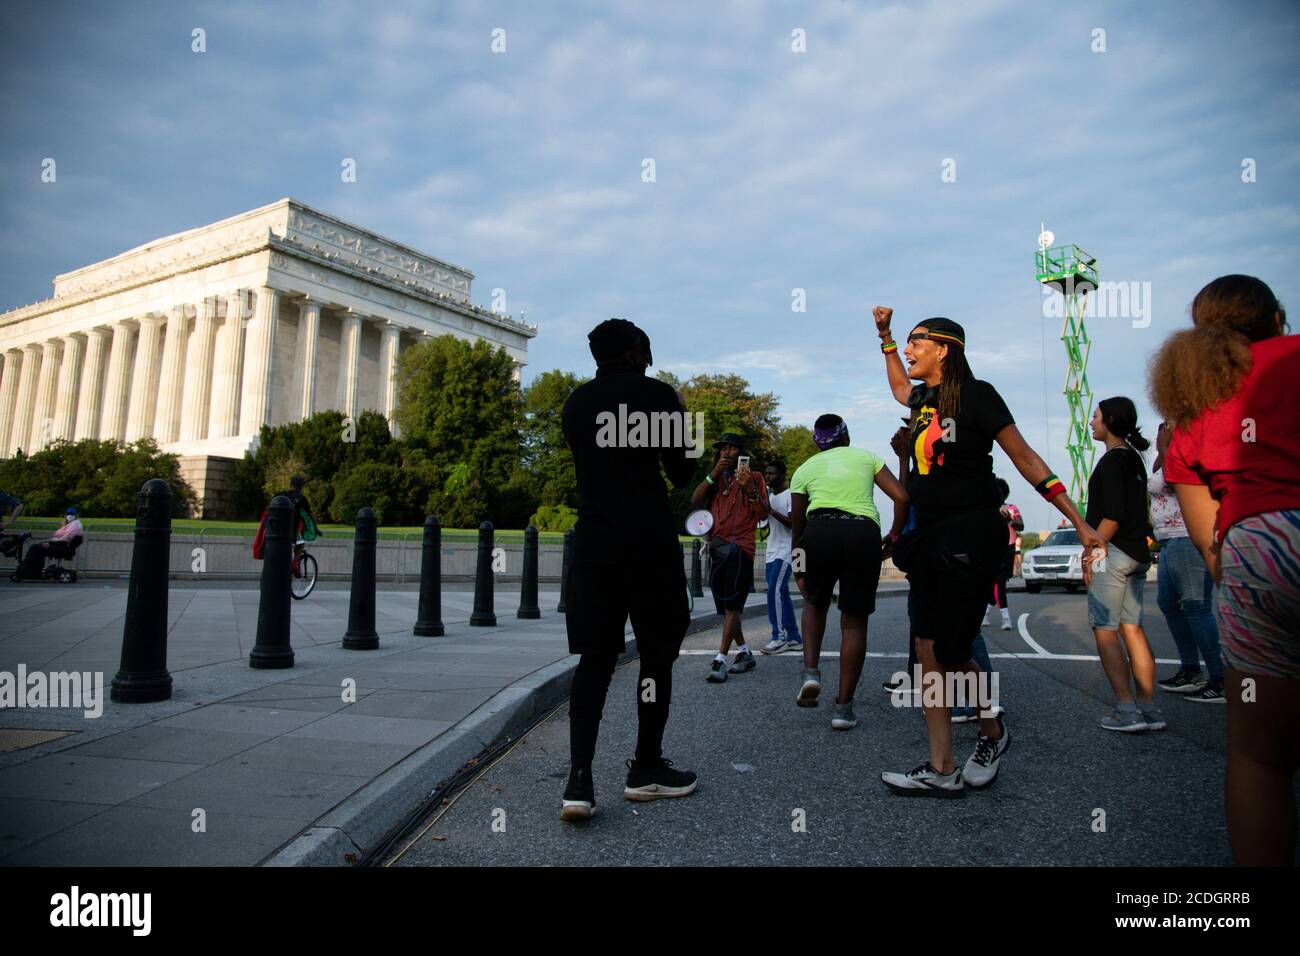 A protest march organized by activist Frank Nitty that started in Milwaukee arrives in at the Lincoln Memorial after more than 700 miles of walking before the beginning of civil rights march organized by Al Sharpton to call attention to systemic racism and police violence after the May police killing of George Floyd in Minnesota, in Washington, DC, on August 28, 2020, amid the coronavirus pandemic. The night before The Commitment March: Get Your Knee Off Our Necks, protests consumed the blocks surrounding the White House, as President Trump gave his presidential nomination acceptance speech Stock Photo